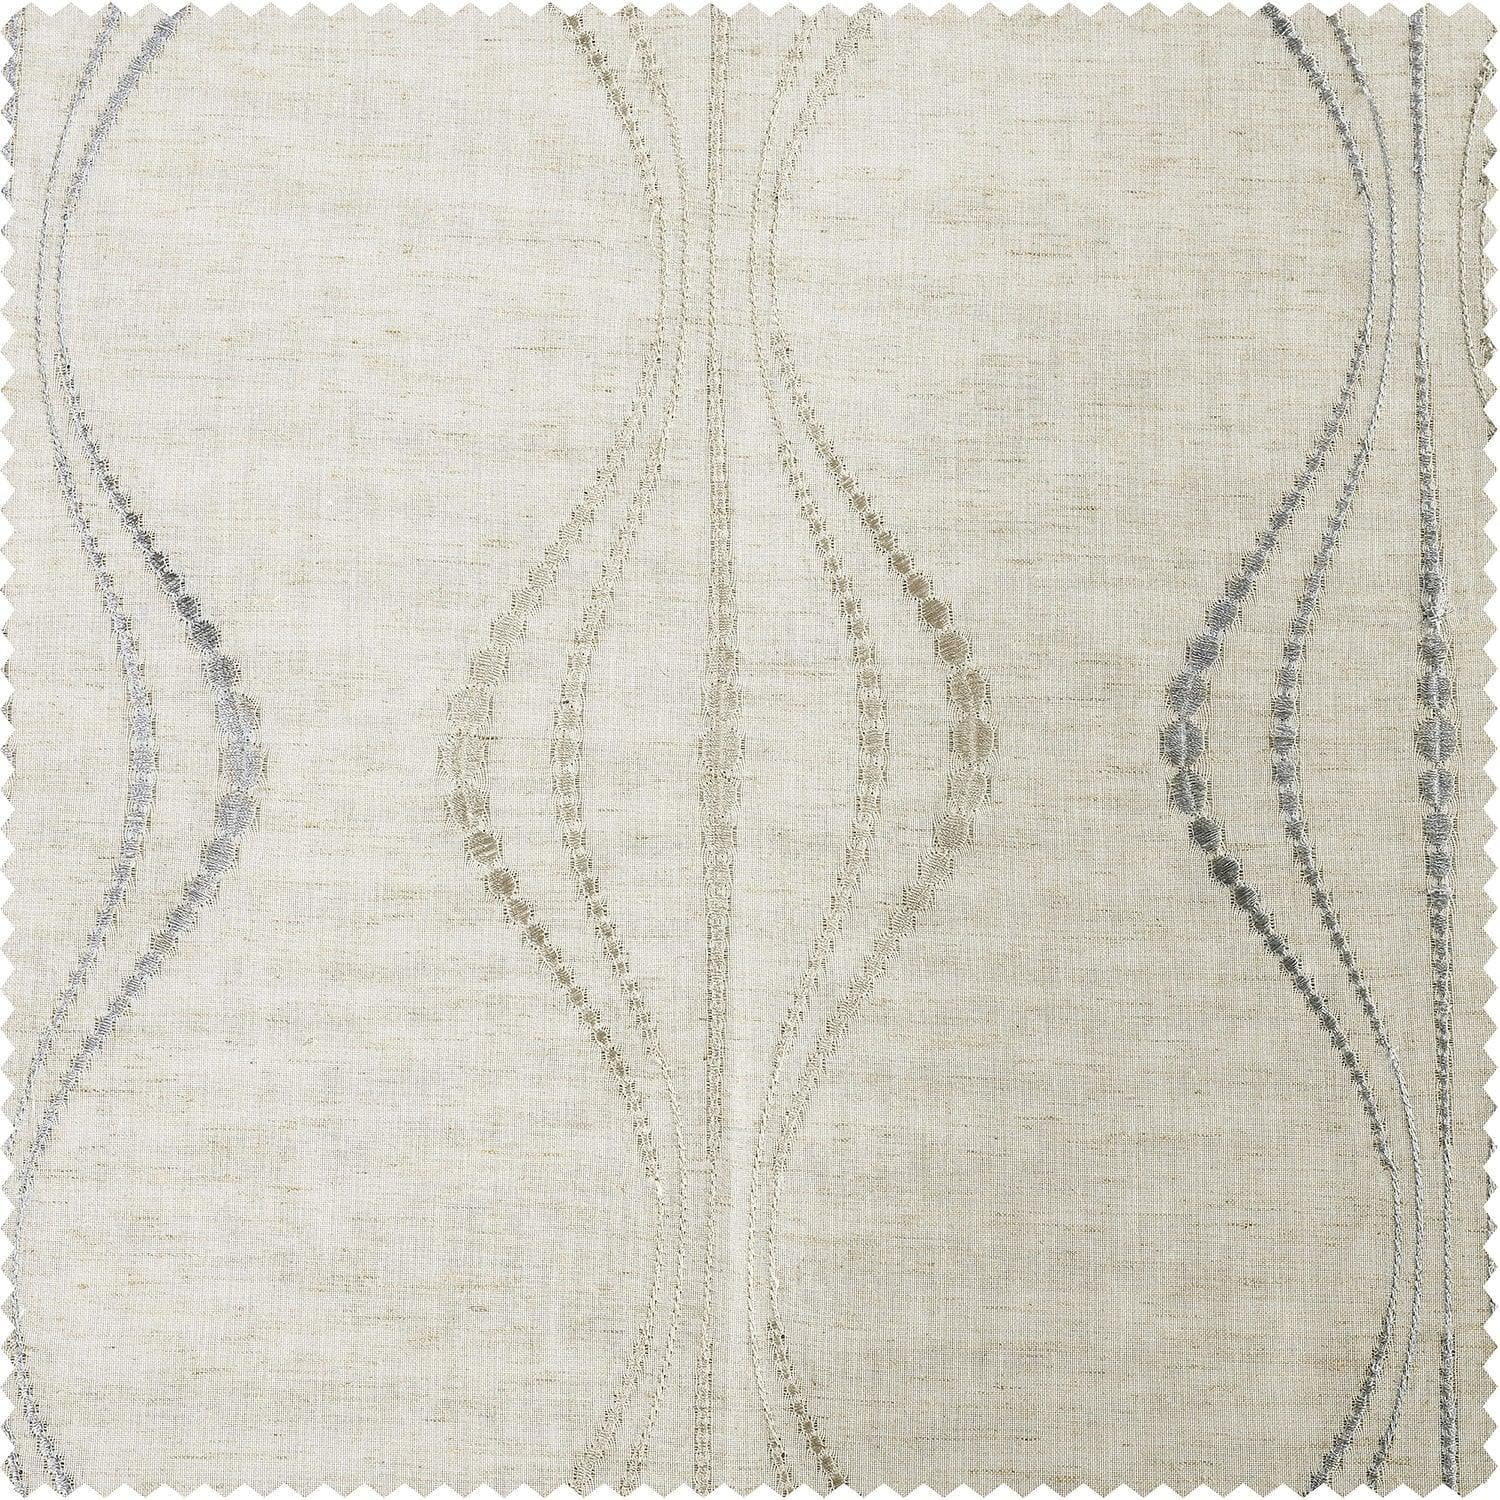 Suez Natural Striped Embroidered Patterned Faux Linen Sheer Curtain